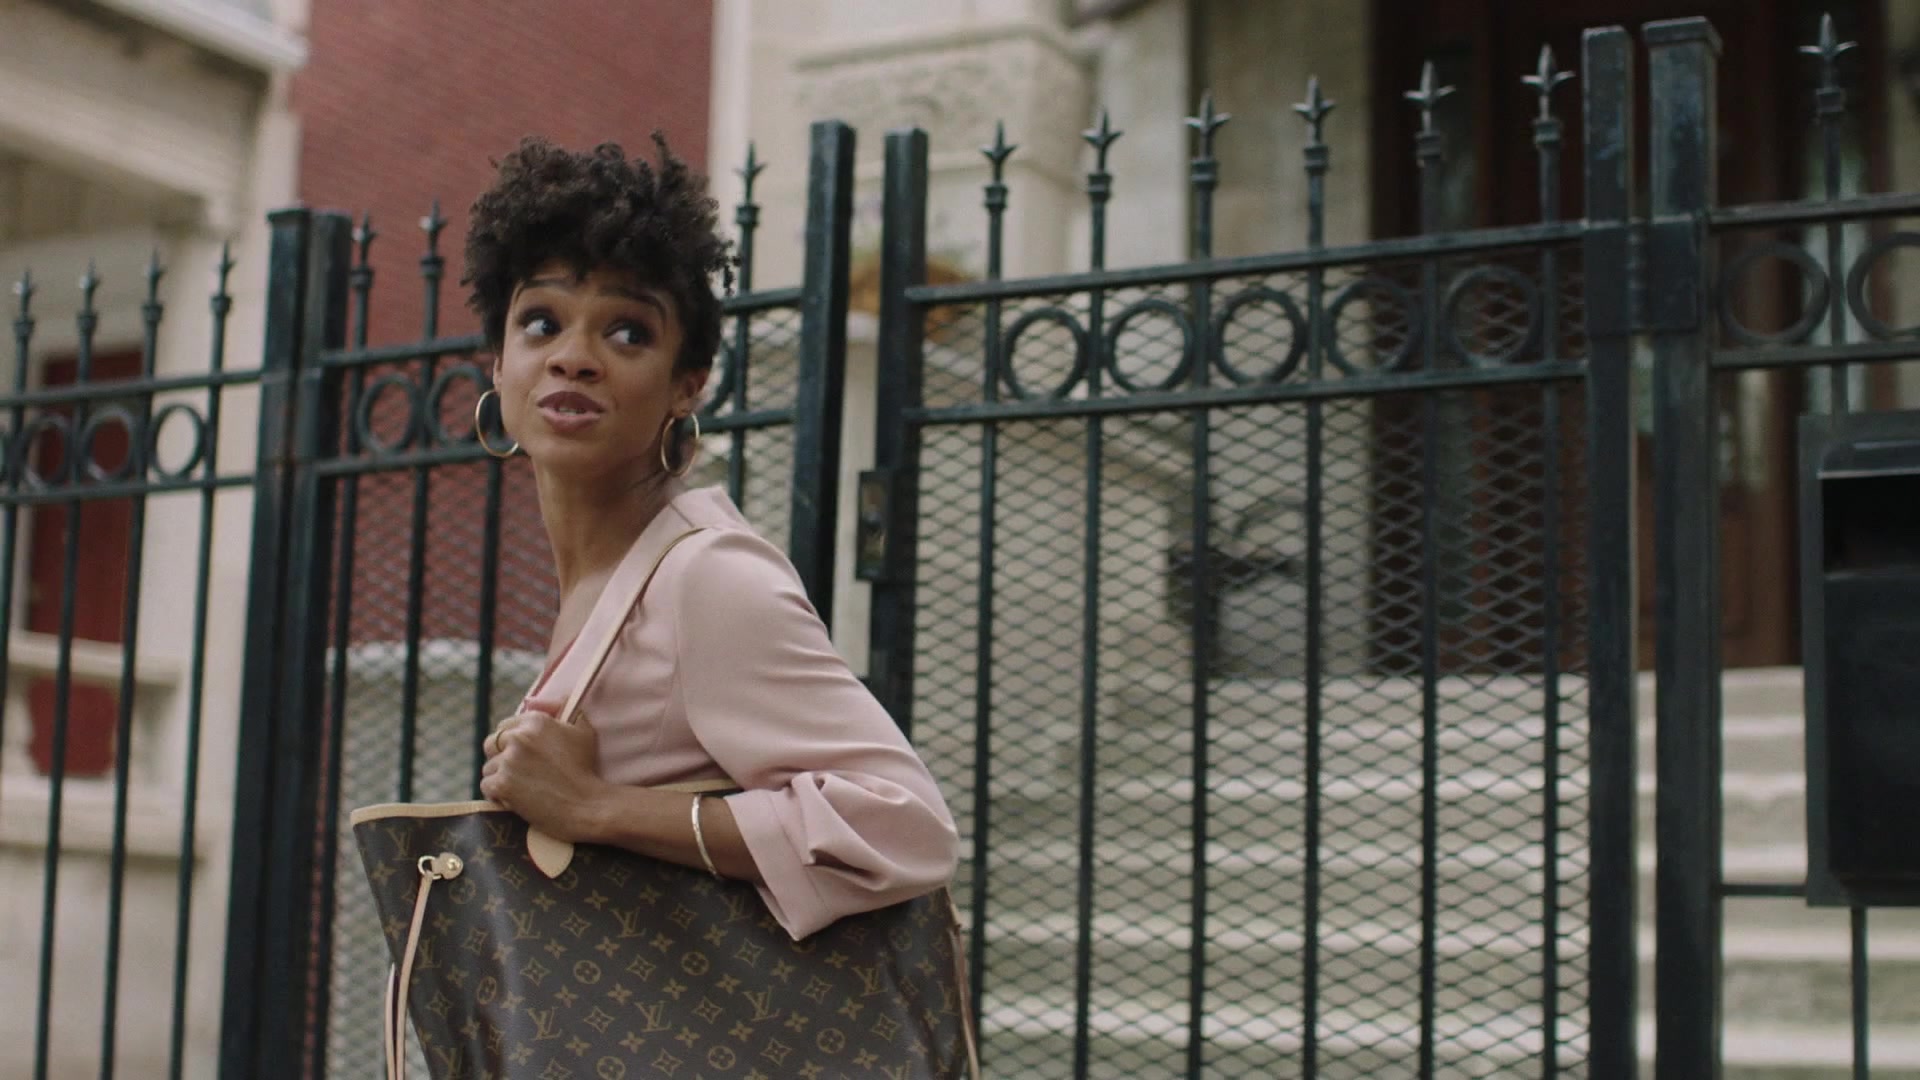 Louis Vuitton Handbag Used by Tiffany Boone in The Chi – Season 2, Episode 6, A Leg Up (2019)